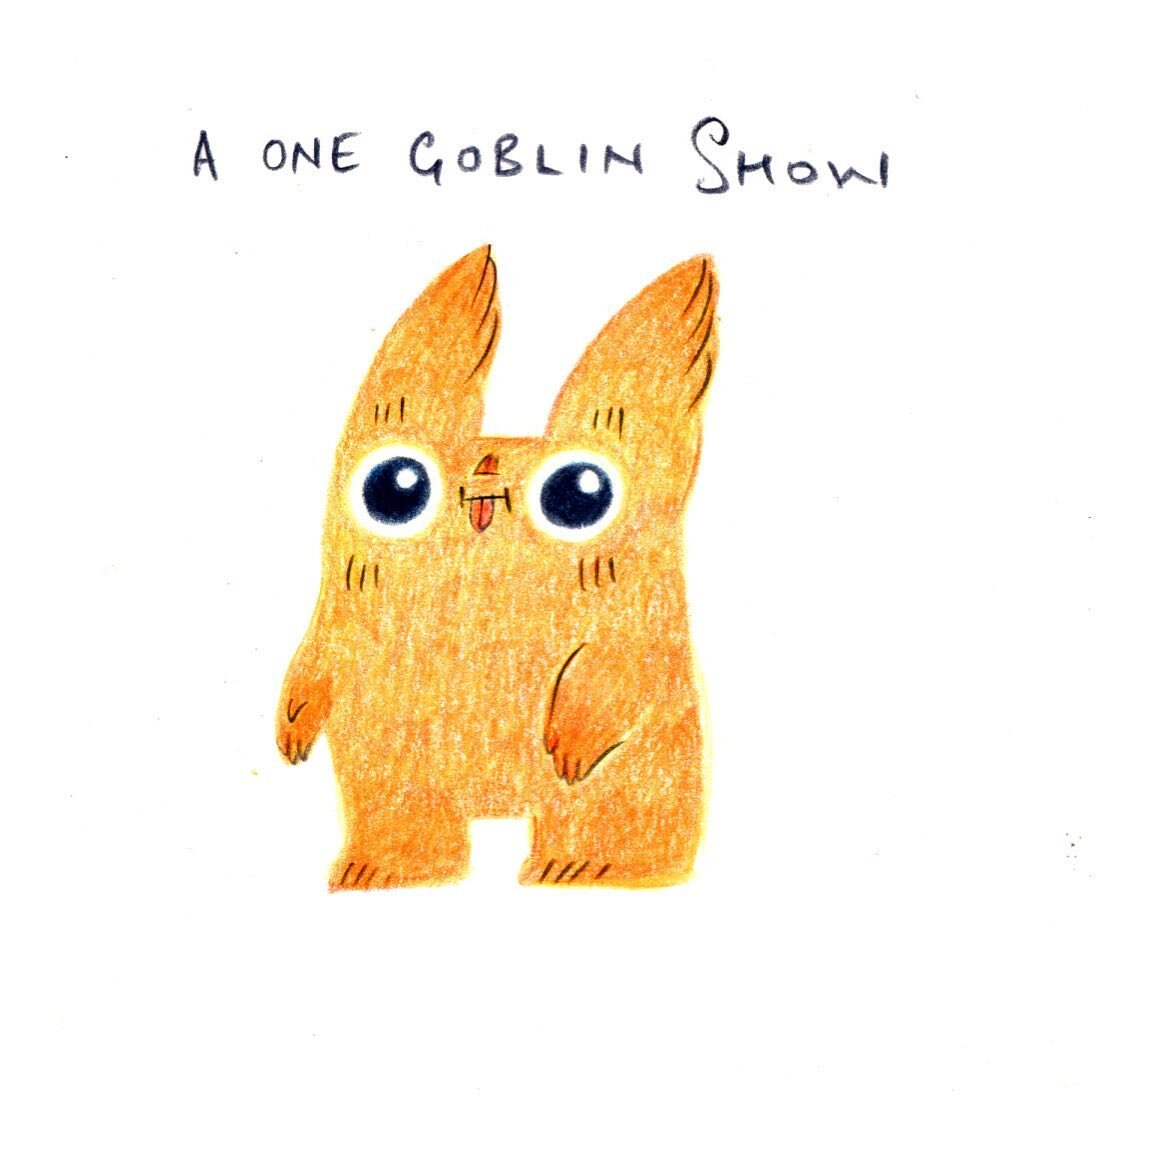 That&rsquo;s it for another year. Goblins hope everyone came to see your kitchen fringe show and also wish they&rsquo;d posted this last week when it was still relevant.
.
But while Festivals will always end, a Medicine Cat&rsquo;s work is never done